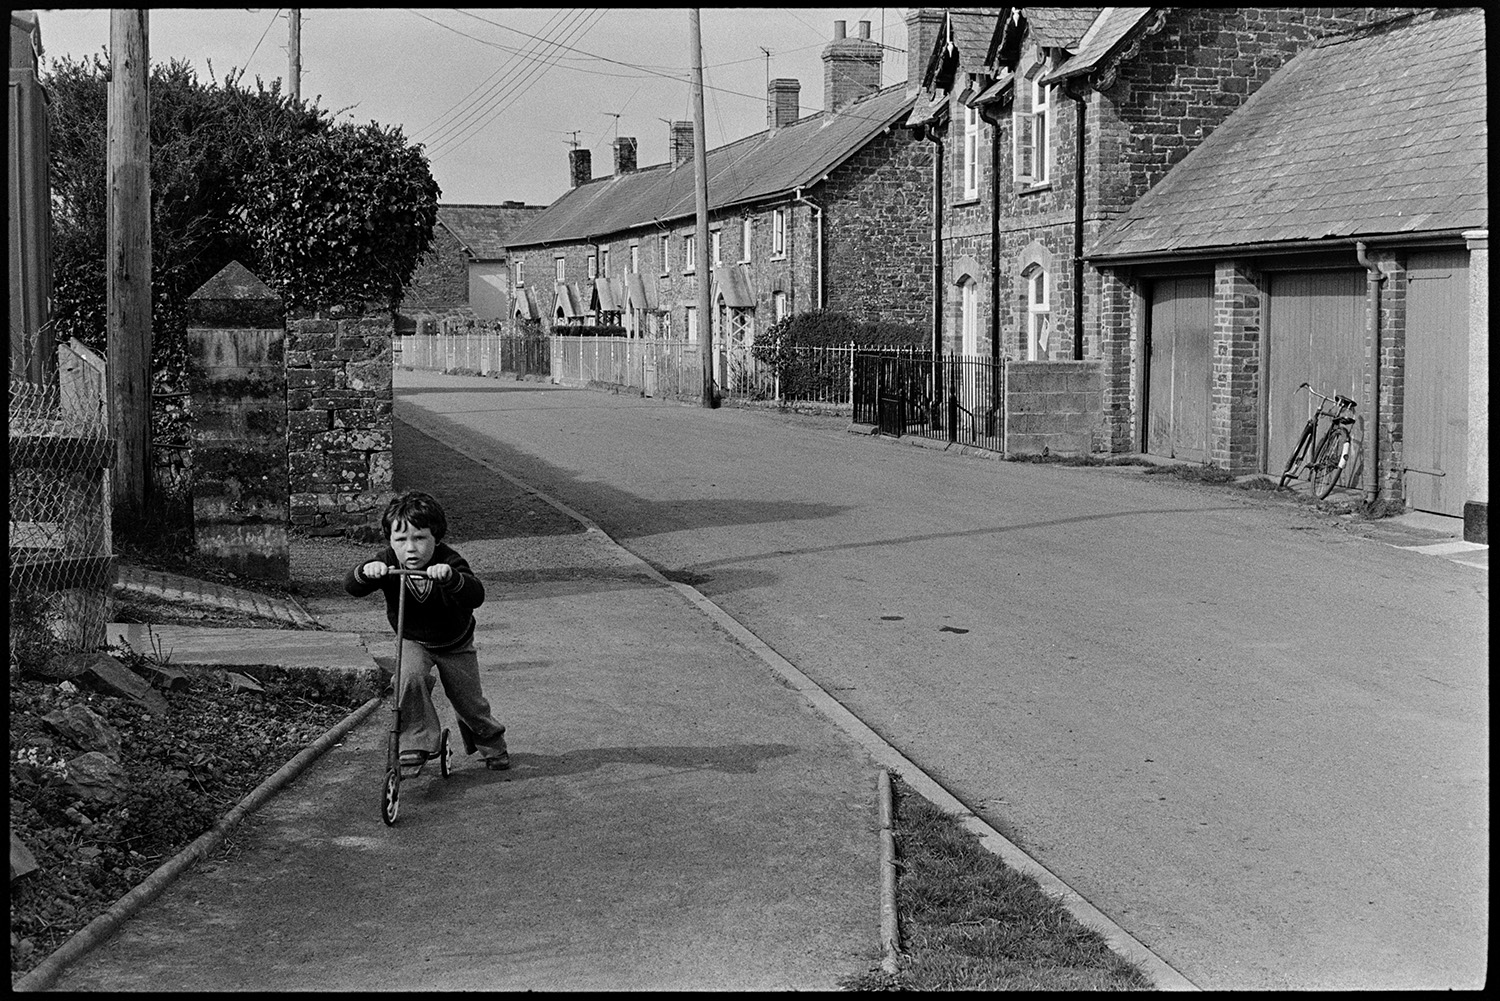 Street scene boy on scooter. 
[A boy pushing a scooter along a street in St Giles in the Wood. Garages and terraced houses can be seen in the background.]